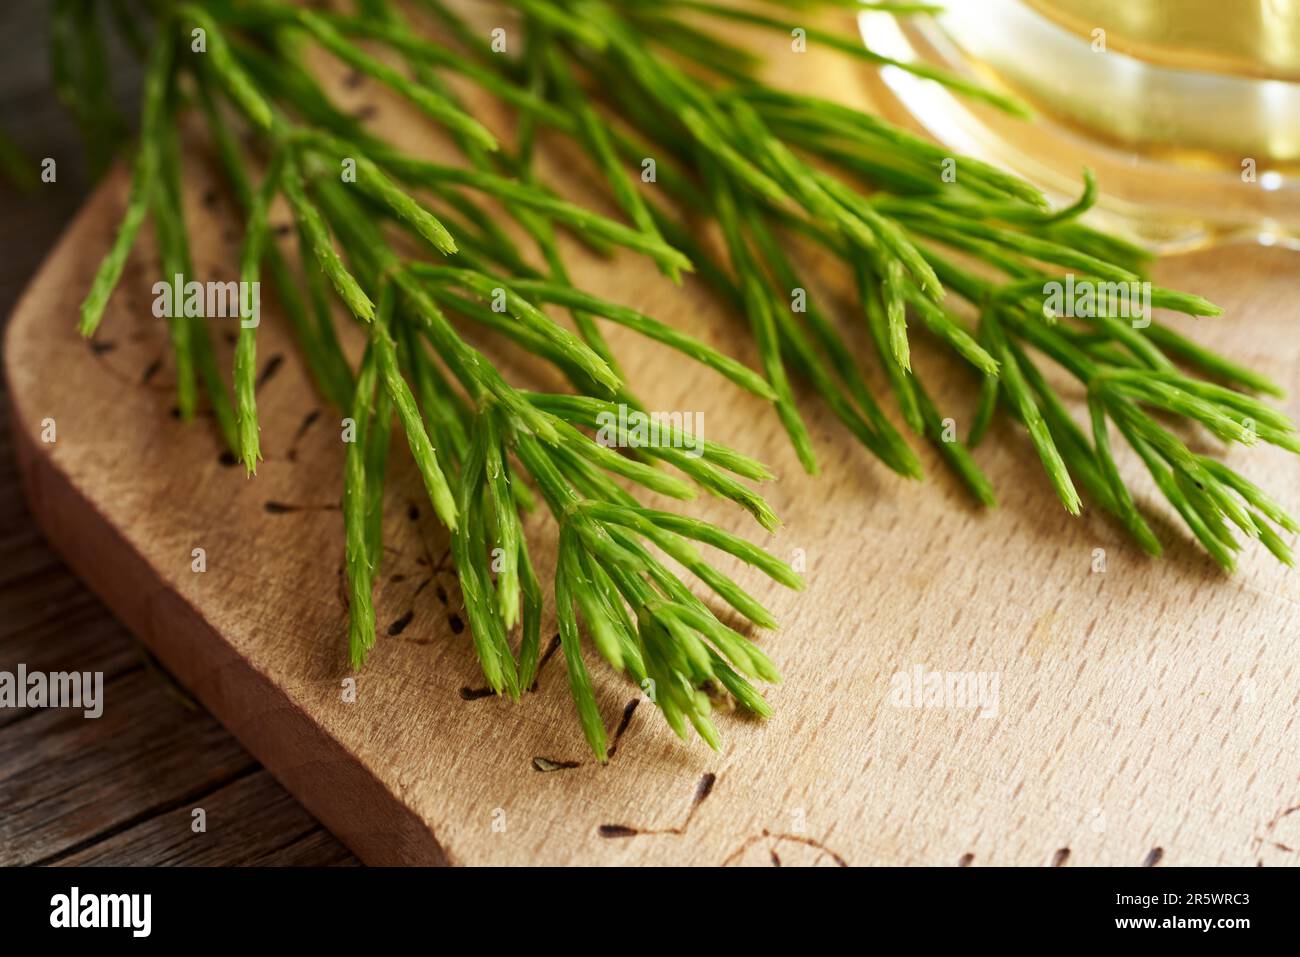 Fresh horsetail or Equisetum plant on a table, with a cup of herbal tea in the background Stock Photo